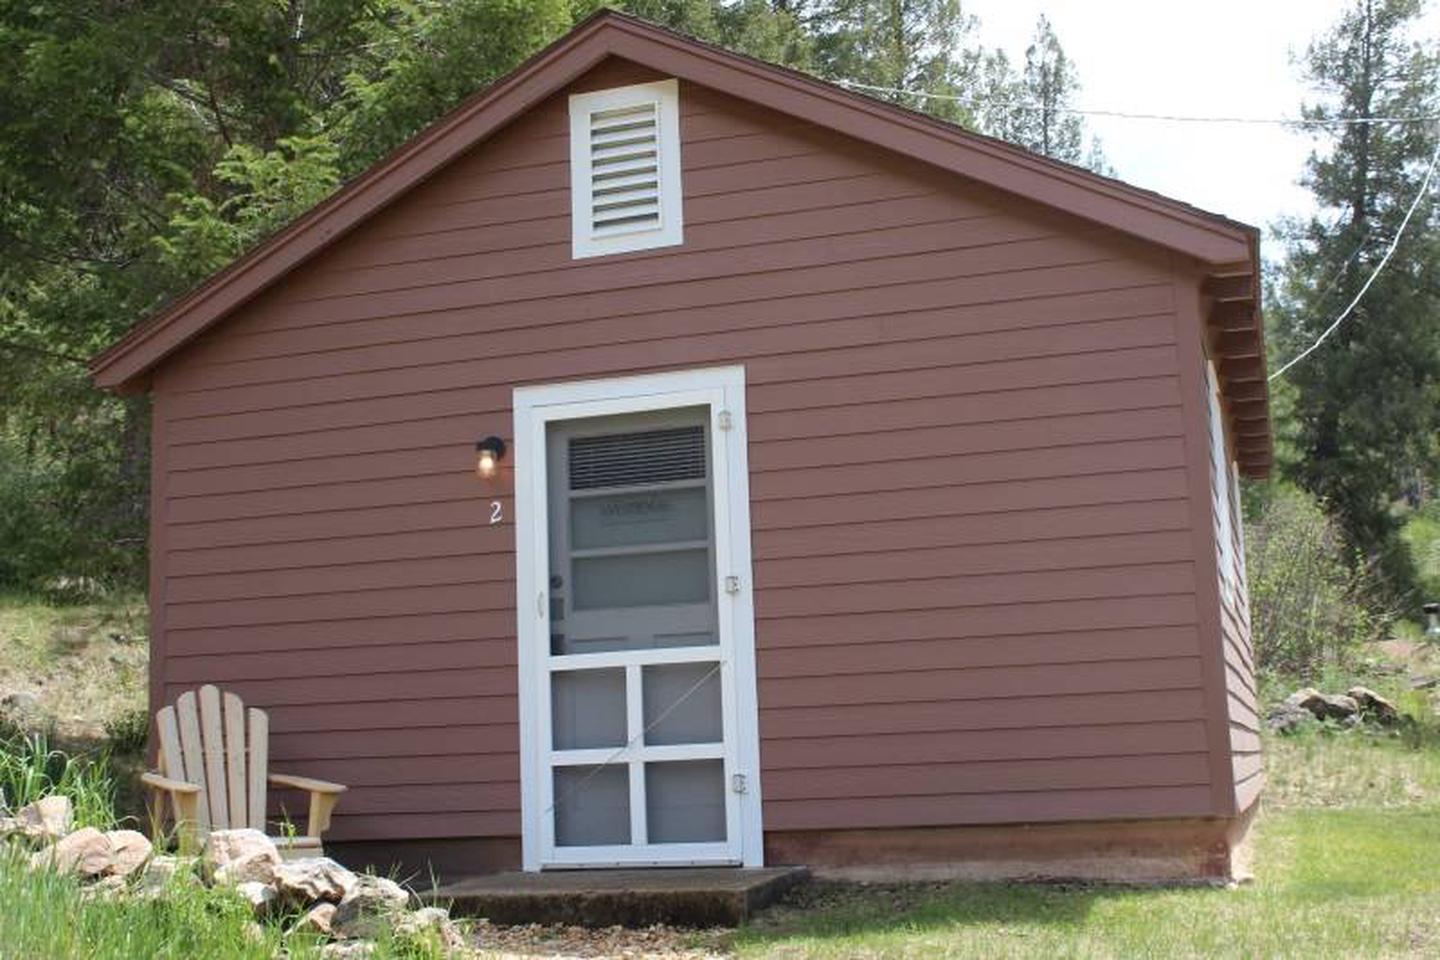 cabin exteriorCabin 2: Exterior
Located up a slight incline across from the showers and restrooms.
